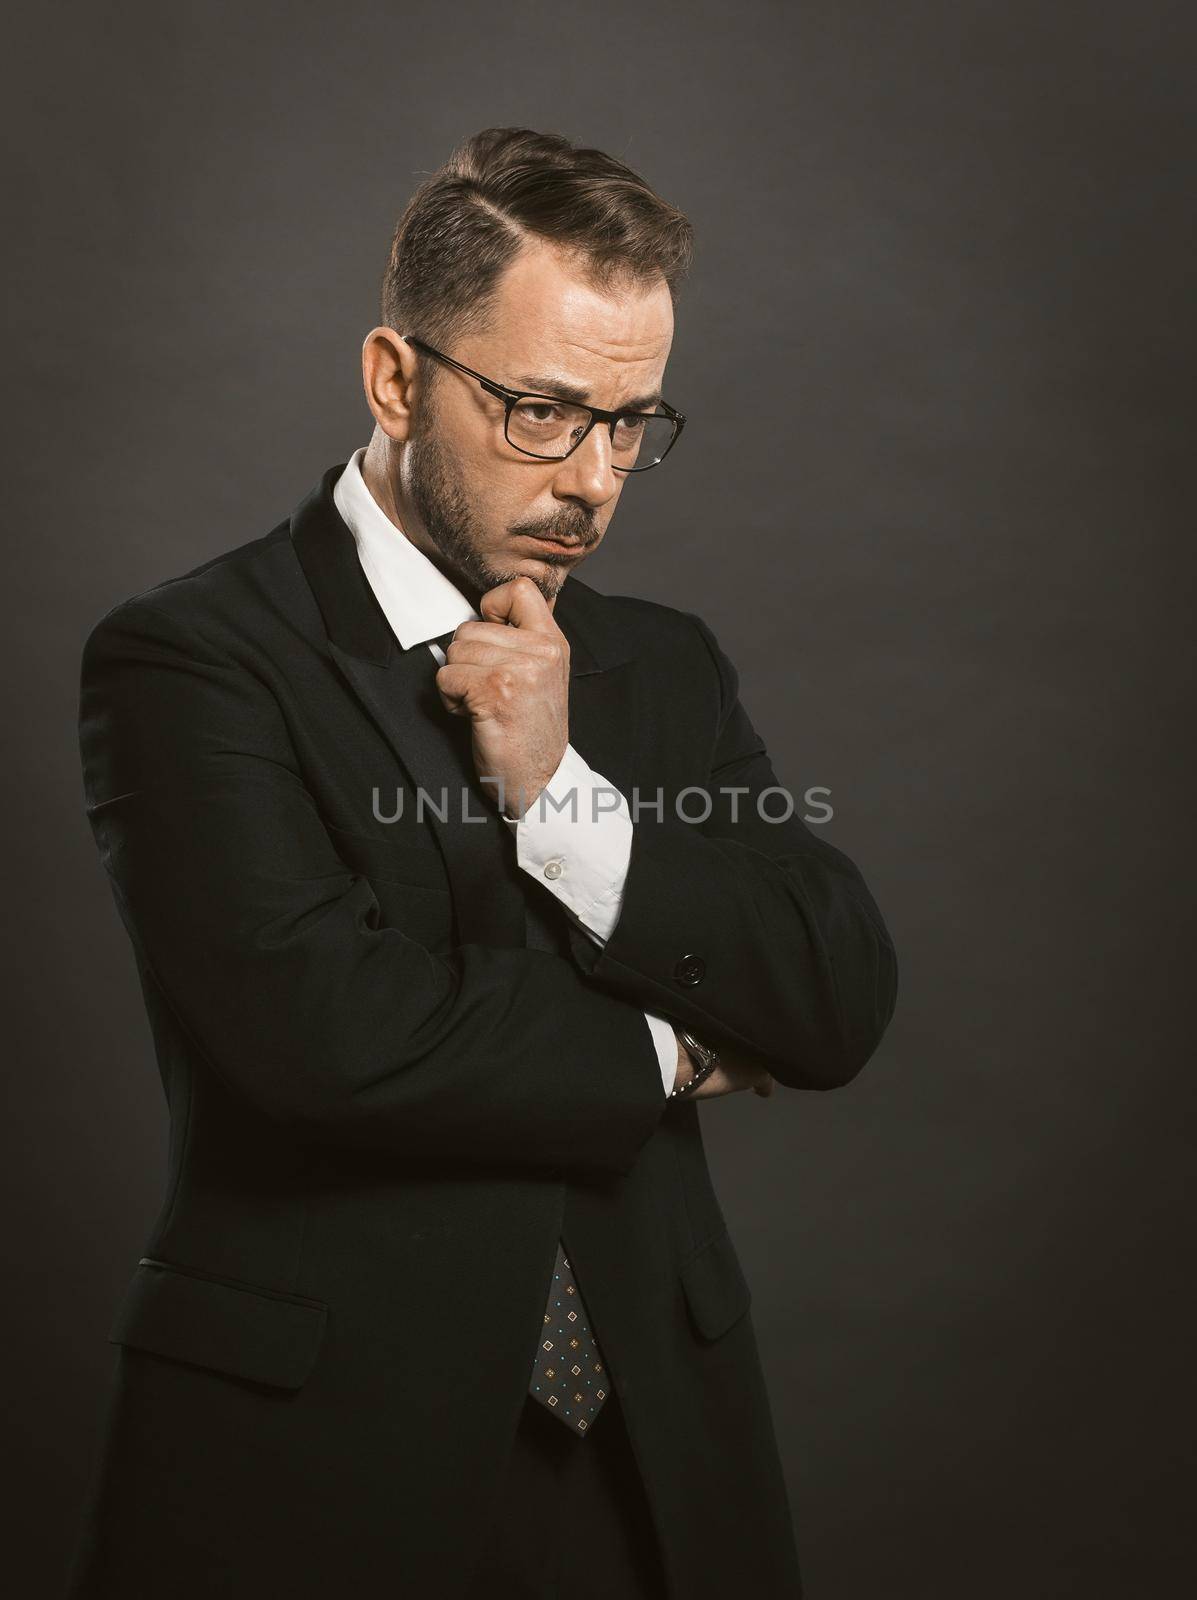 Doubting businessman crossed his arms touching his chin. Thoughtful intelligent man in glasses stands hesitantly looking to the side. Doubt concept. Toned image.